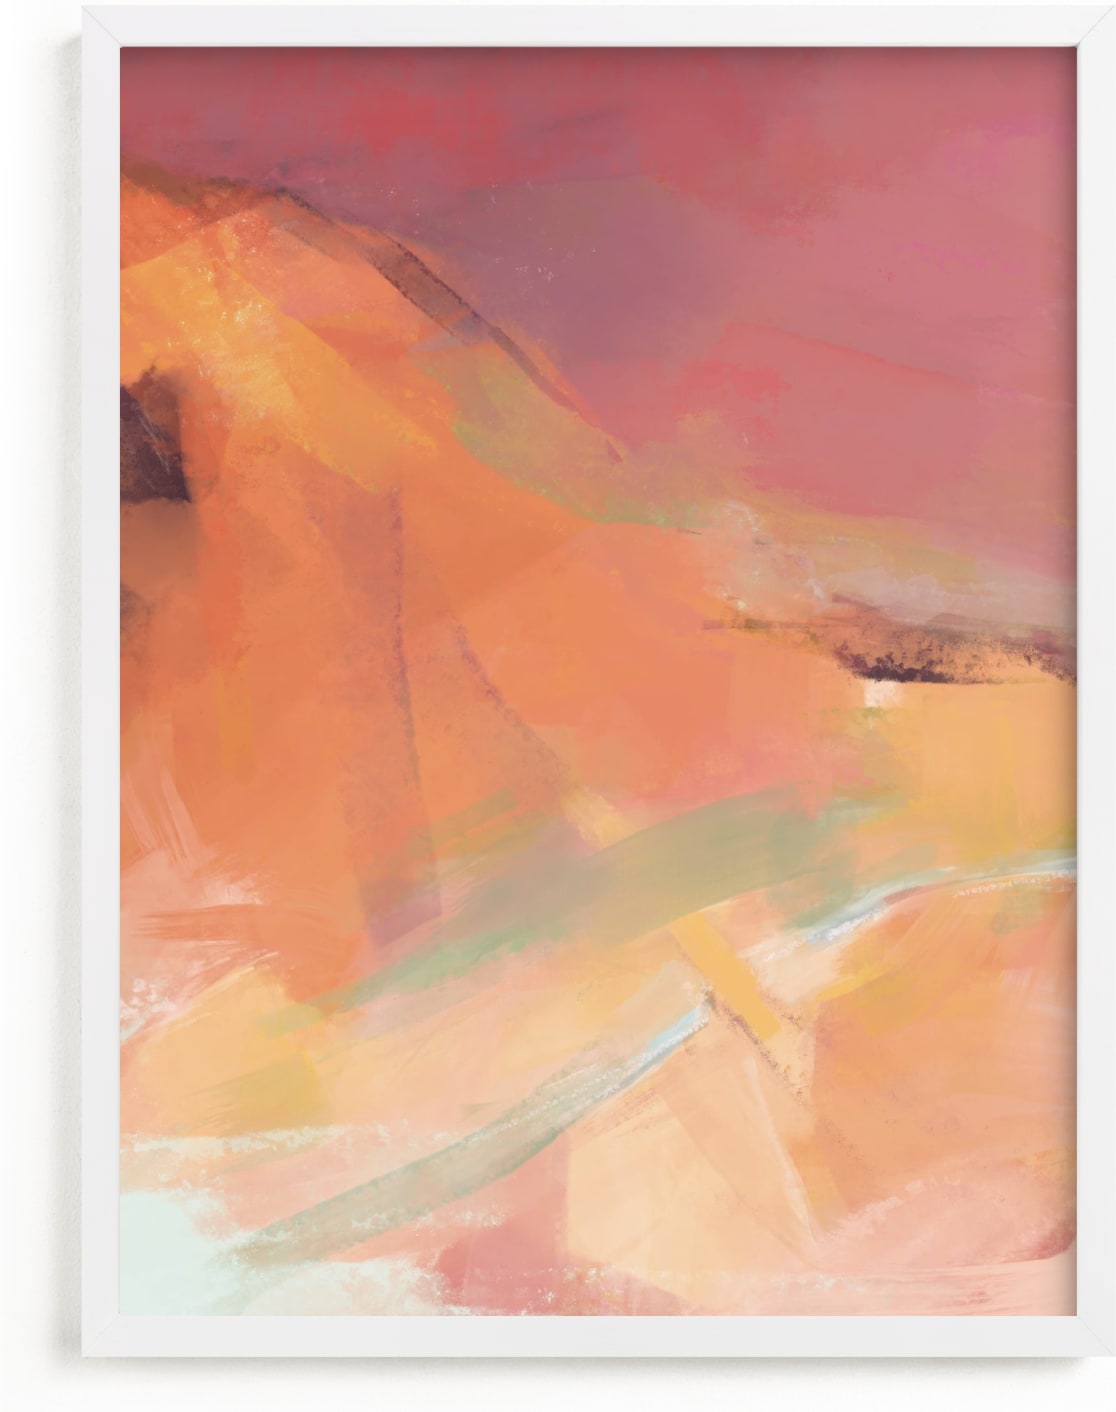 This is a beige, orange, rosegold art by Eric Ransom called Crevice I.